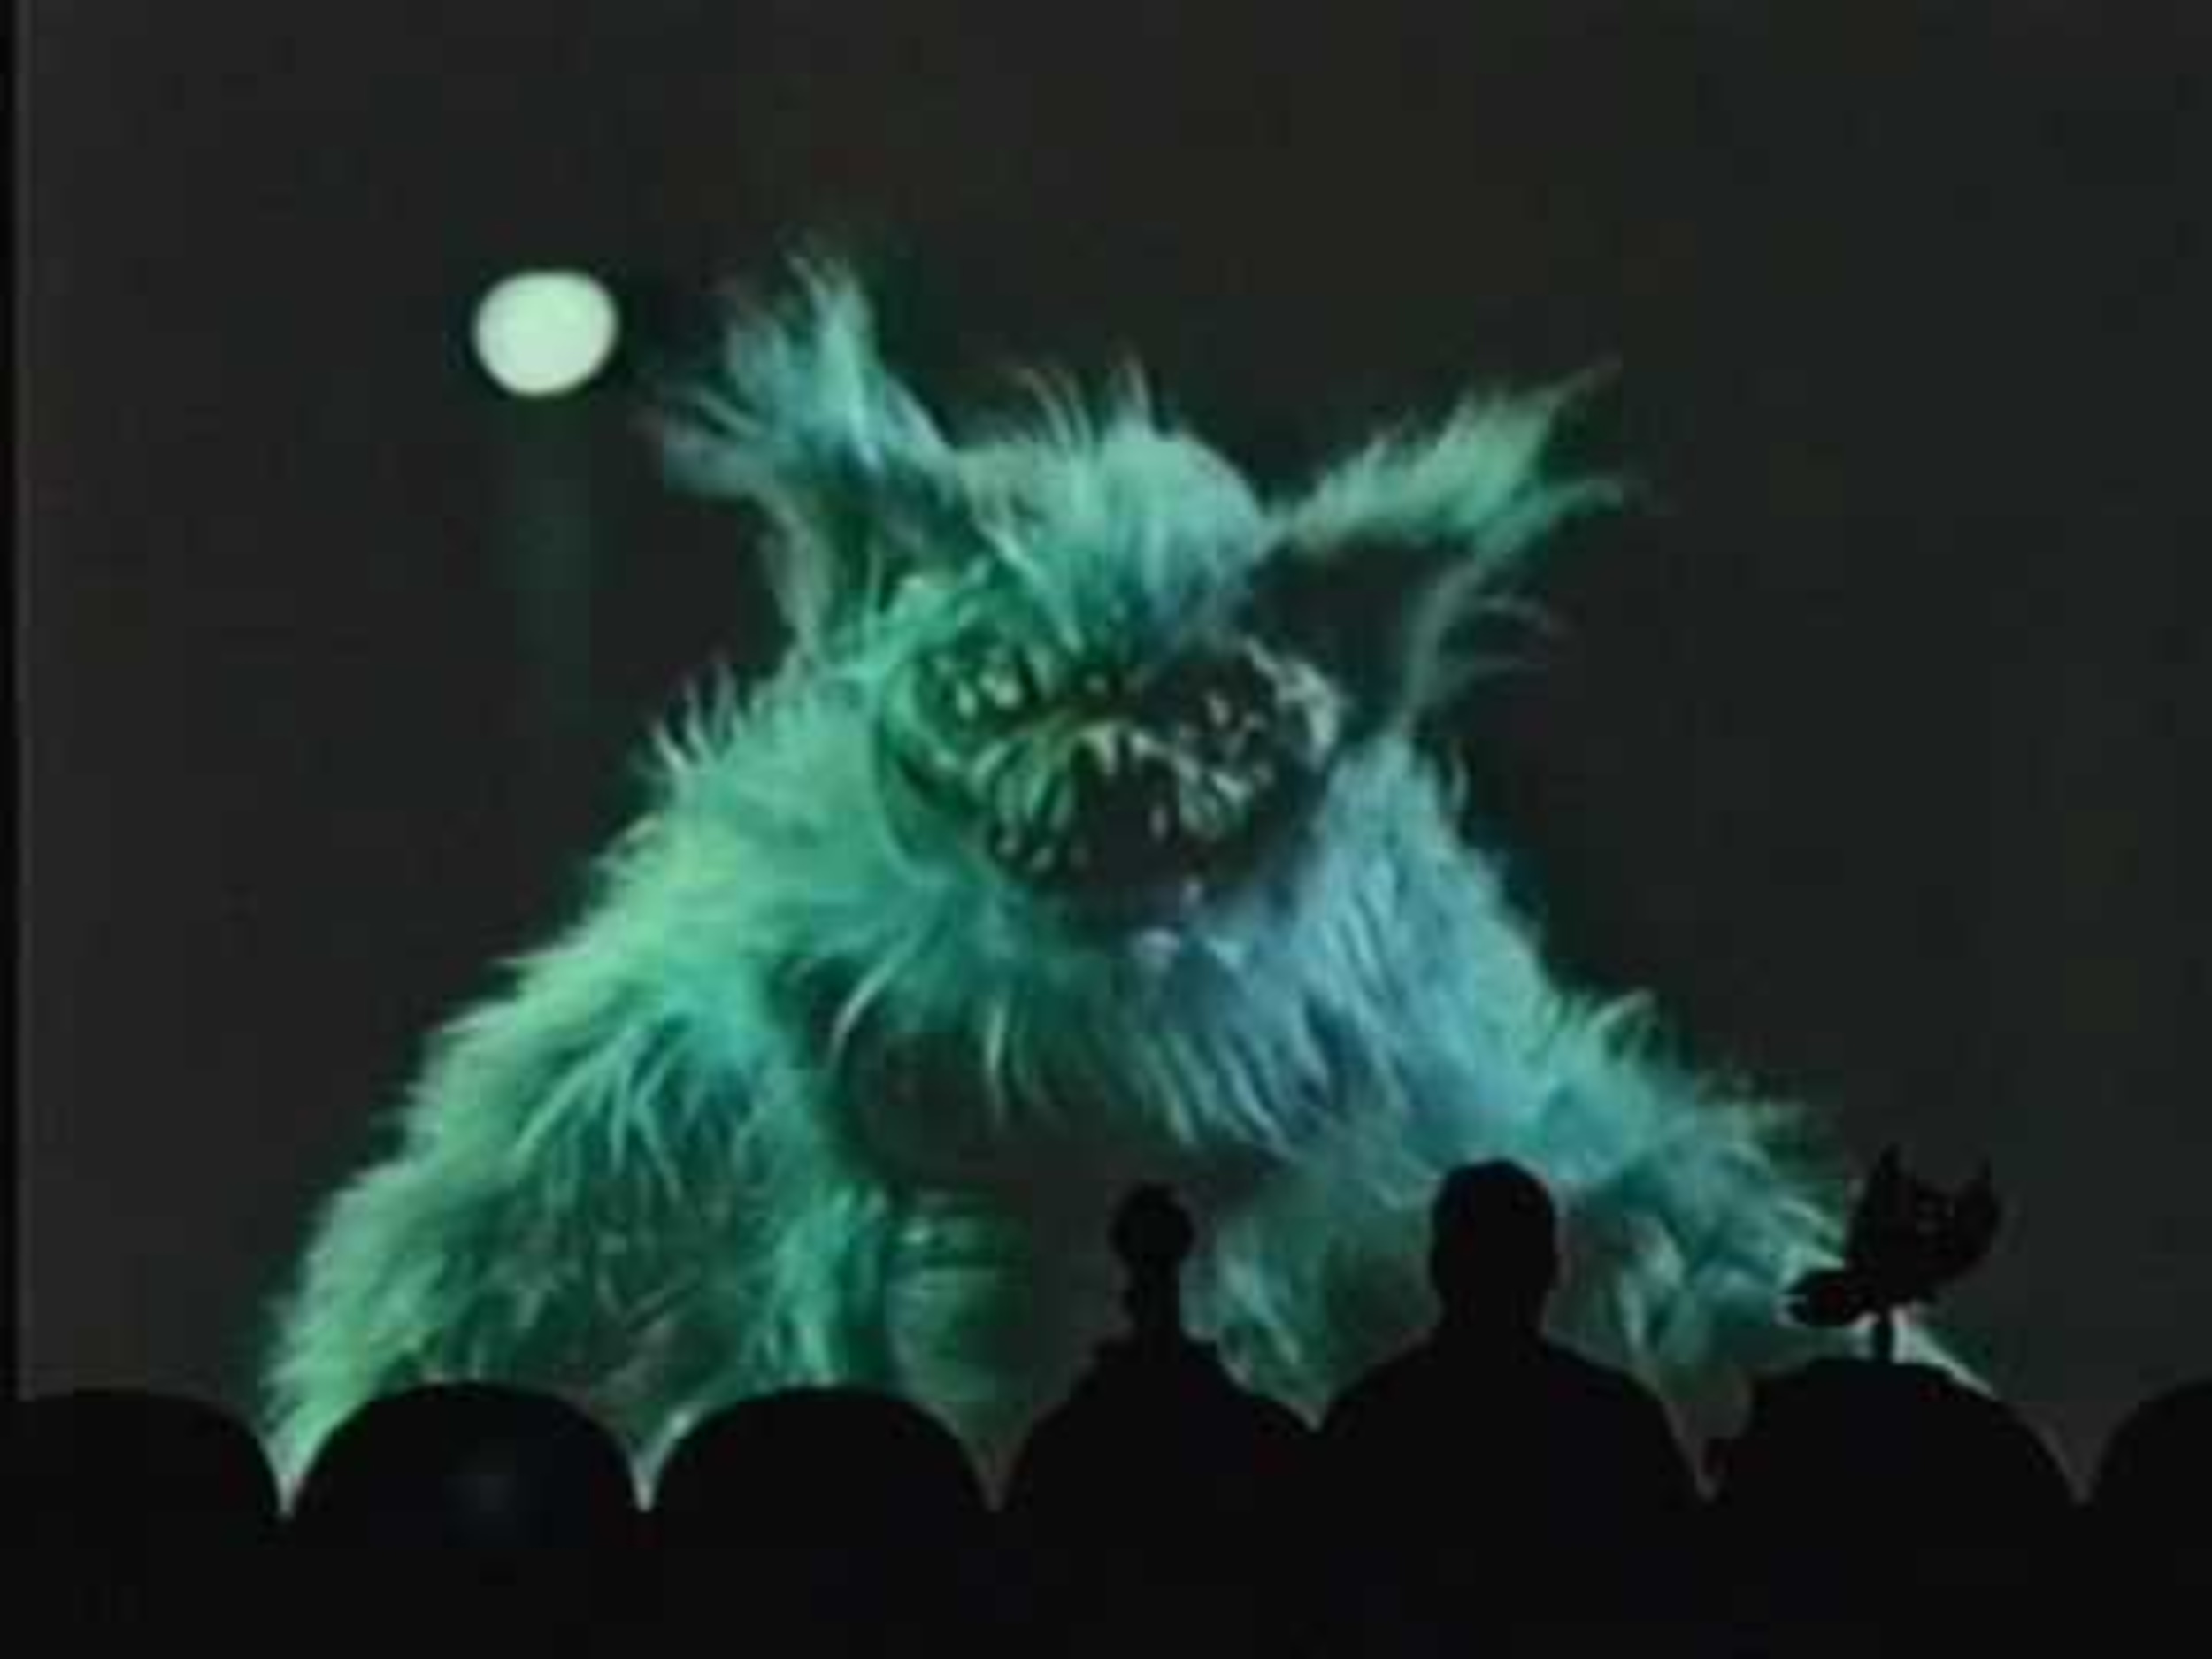 <p>And we arrive at the best of the bunch. It was hard to top this list. There have been so many great episodes of “Mystery Science Theater 3000.” However, “Hobgoblins” ranks as No. 1, and it's probably the most “so bad it’s good” movie it ever showed. Just watching it by itself is a riot. The movie is so dumb in a hilarious way. The people working on the show seemed to have fun with it as well, because the riffs are particularly strong, even though they don’t need to be. We also get some solid host segments. When you put it all together, you get the best episode of “MST3K.”</p><p><a href='https://www.msn.com/en-us/community/channel/vid-cj9pqbr0vn9in2b6ddcd8sfgpfq6x6utp44fssrv6mc2gtybw0us'>Did you enjoy this slideshow? Follow us on MSN to see more of our exclusive entertainment content.</a></p>